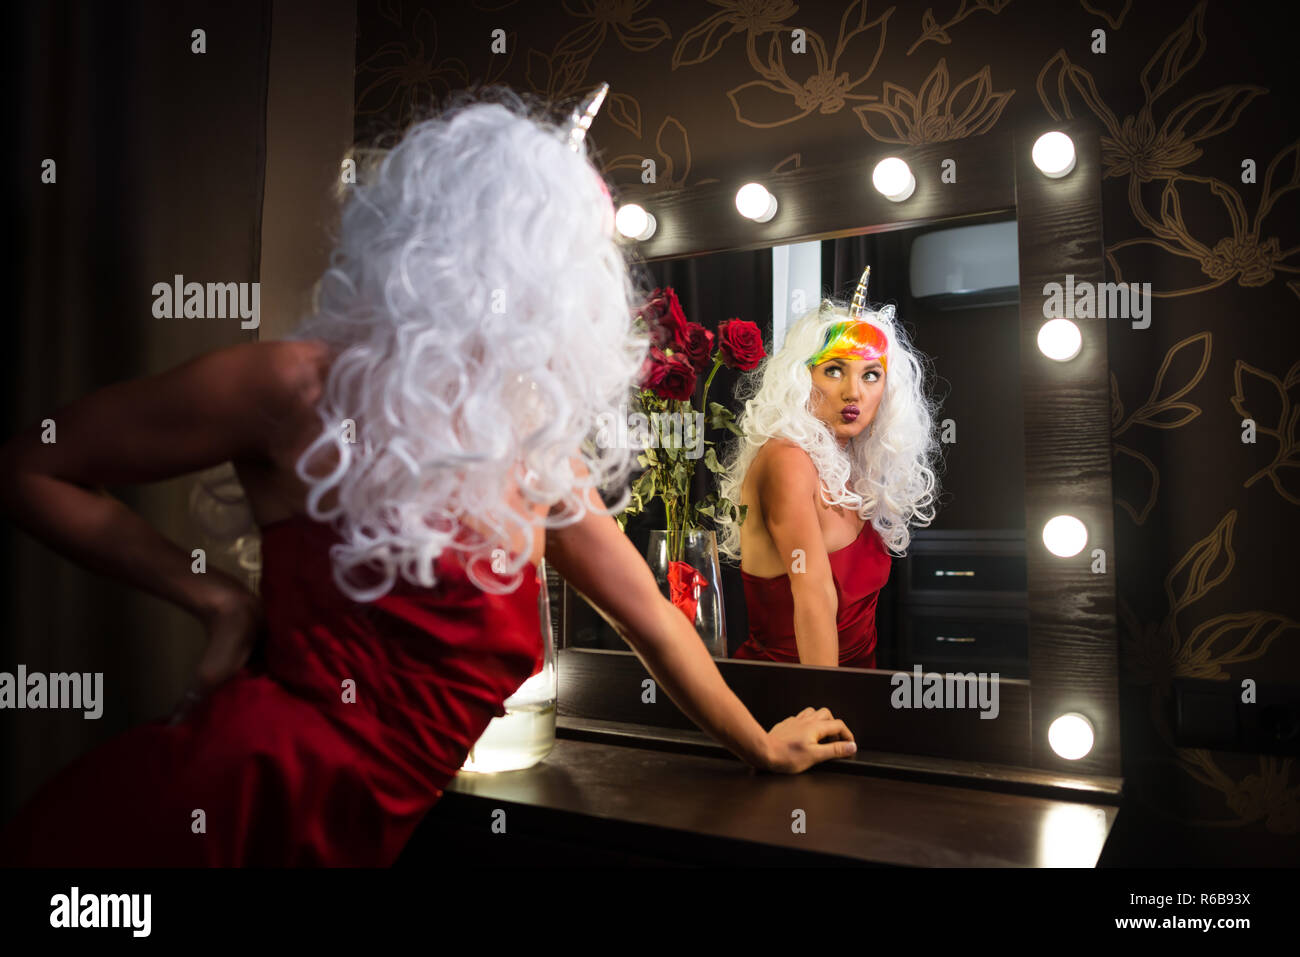 Funny young woman in unusual wig looking at himself in mirror in dressing room with flowers. Strange lady in red dress. Girl unicorn makes faces. Stock Photo